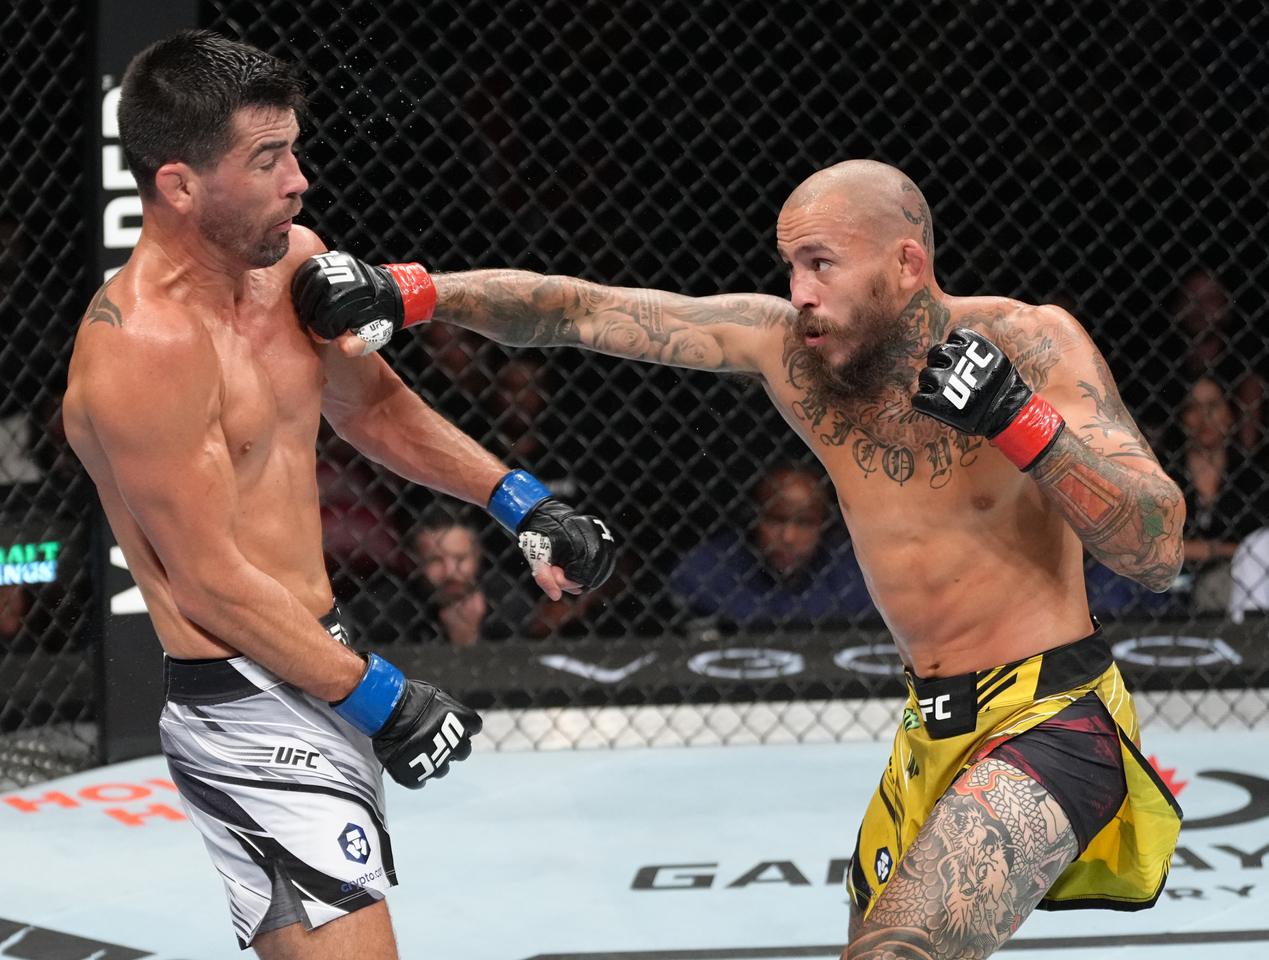 Monster Energy’s Marlon Vera Knocks Out Dominick Cruz at UFC Fight Night San Diego and Earns the UFC’s $50,000 Performance of the Night Bonus